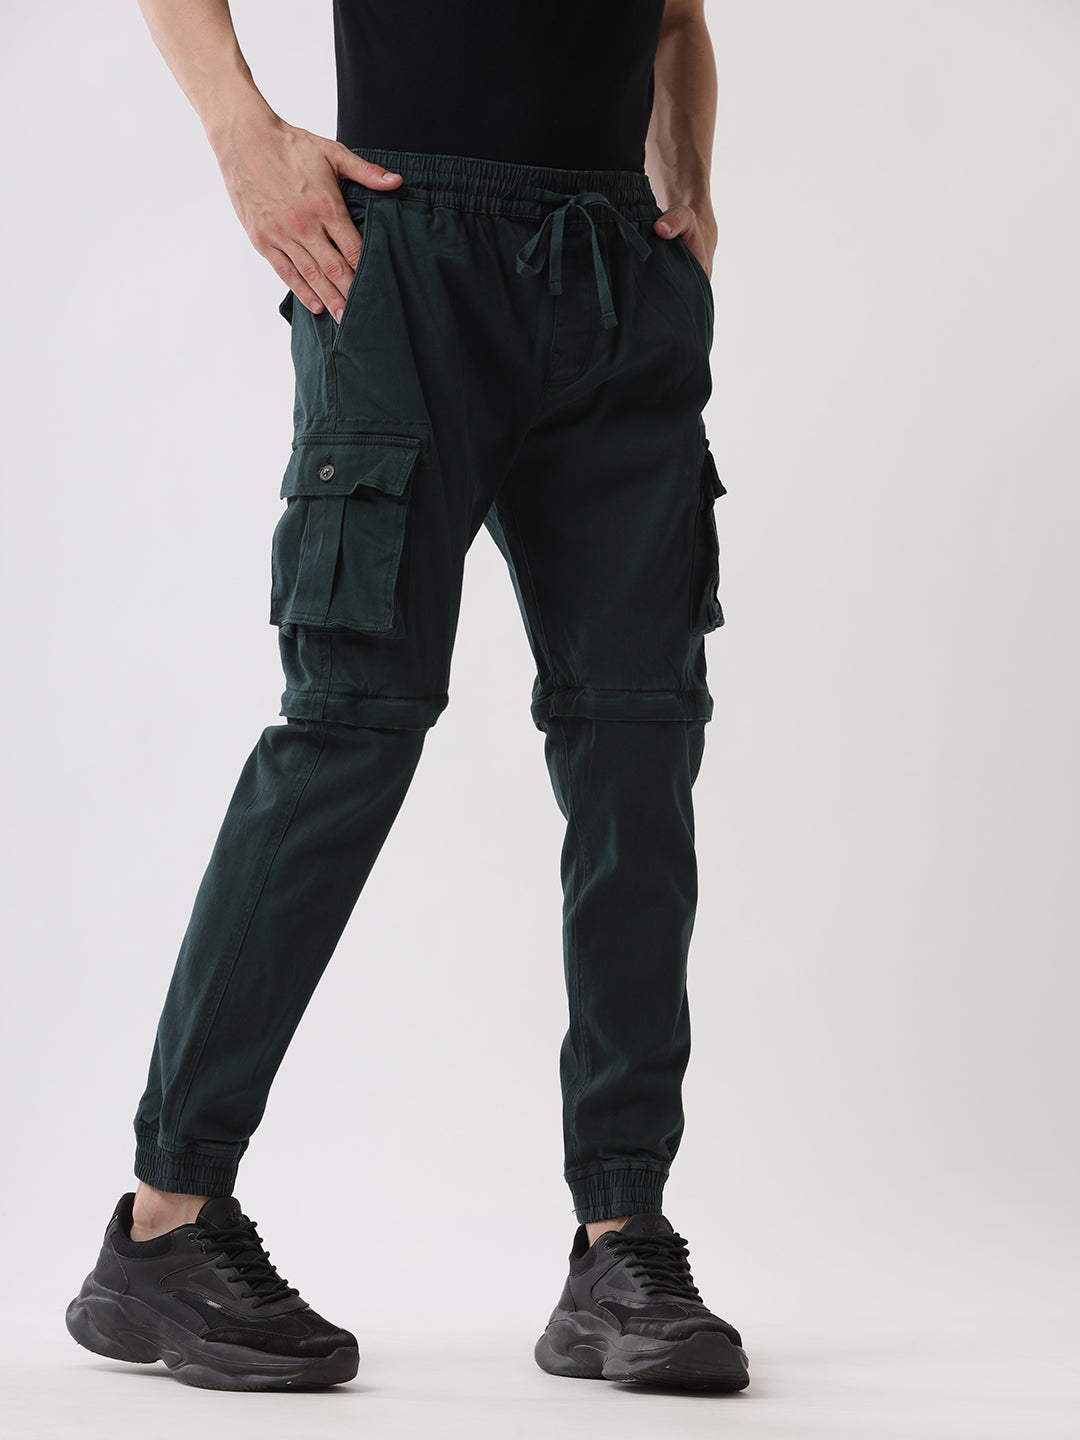 Grey Blend Straight Fit Trouser